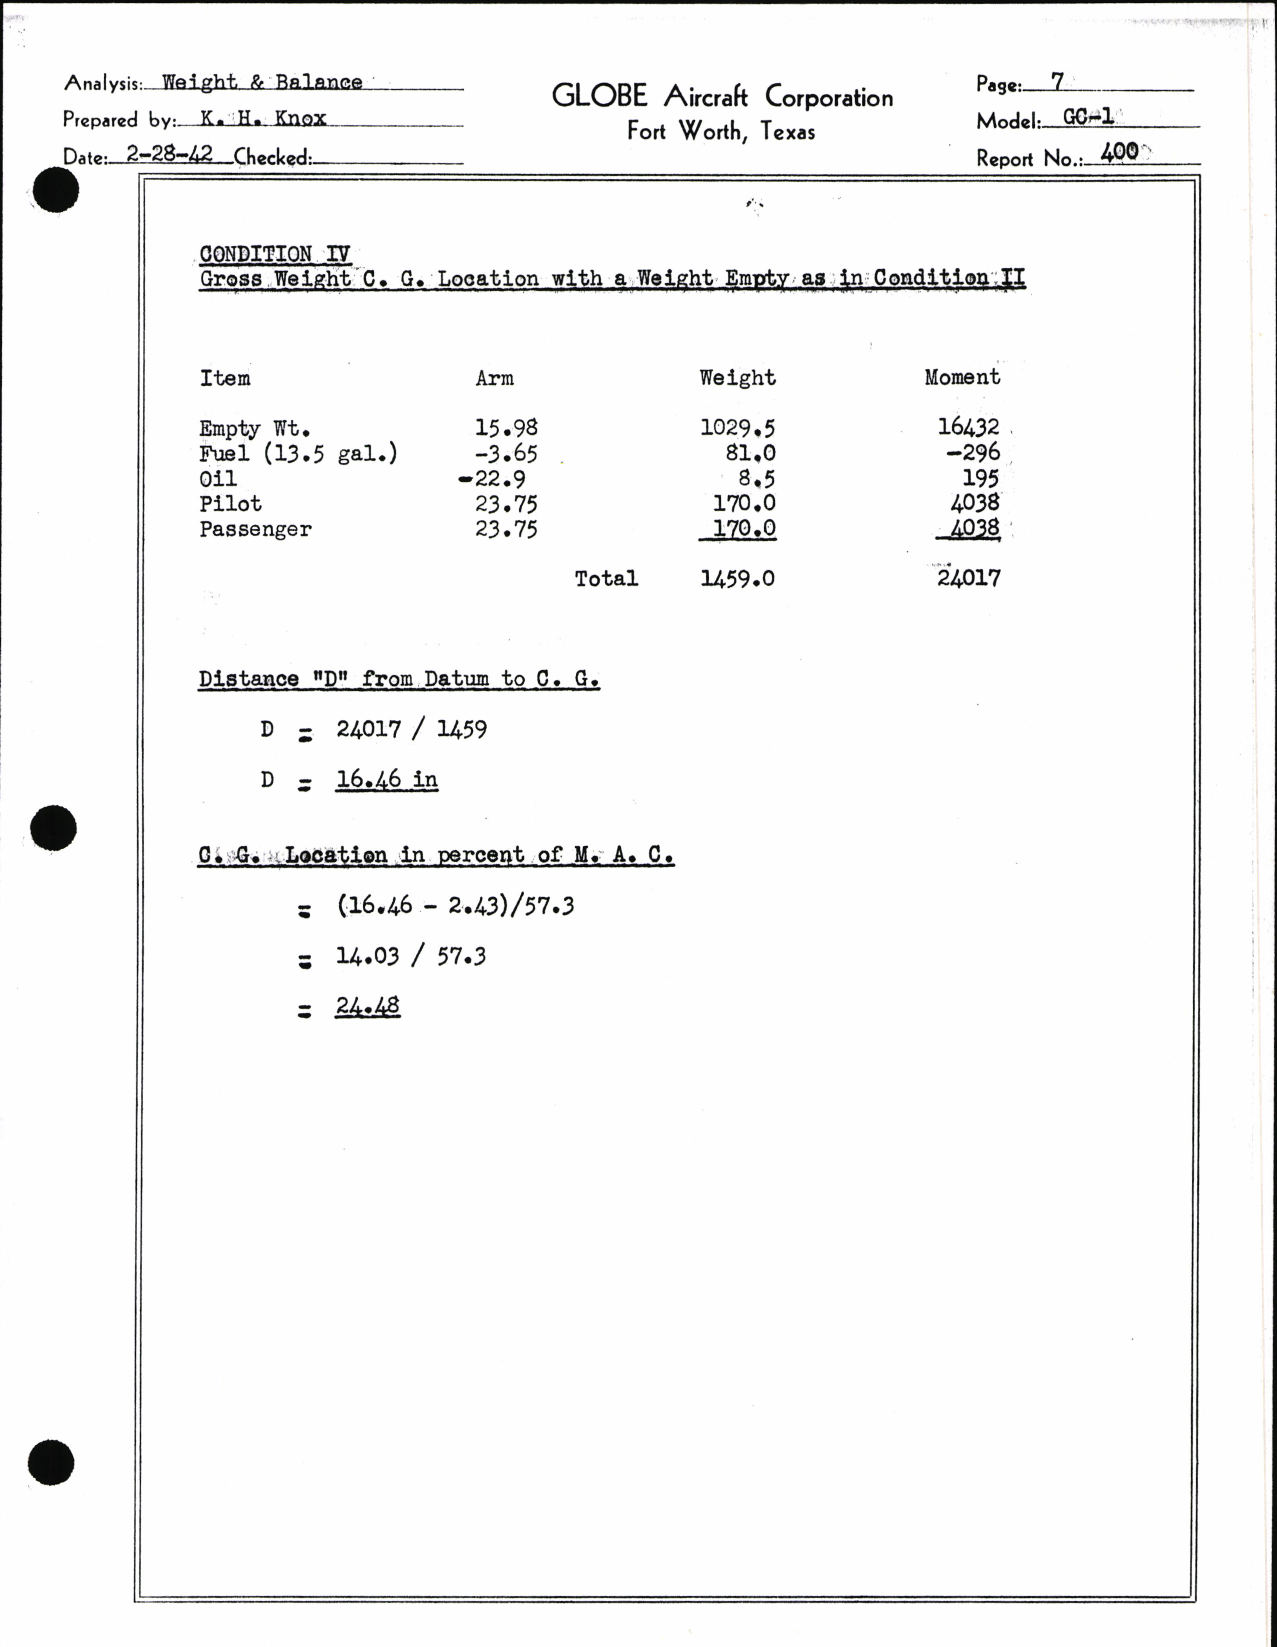 Sample page 6 from AirCorps Library document: Weight and Balance Data for Globe Model GC-1